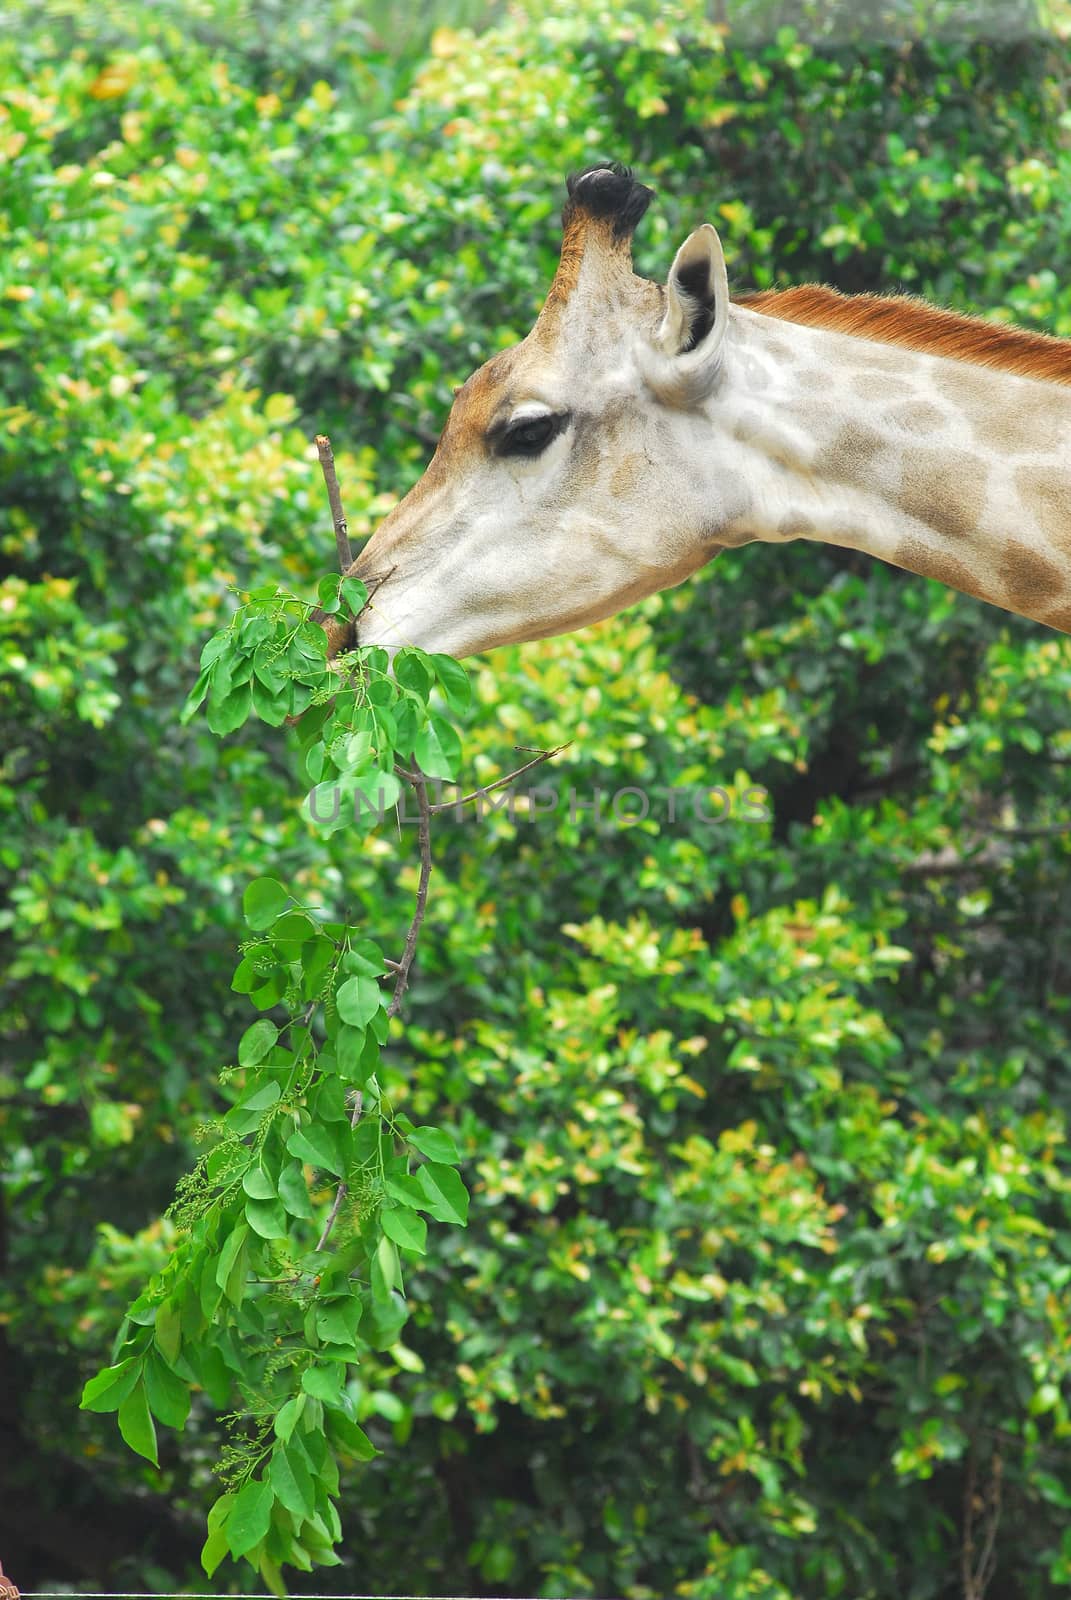 Young adult giraffe eating leaves by think4photop